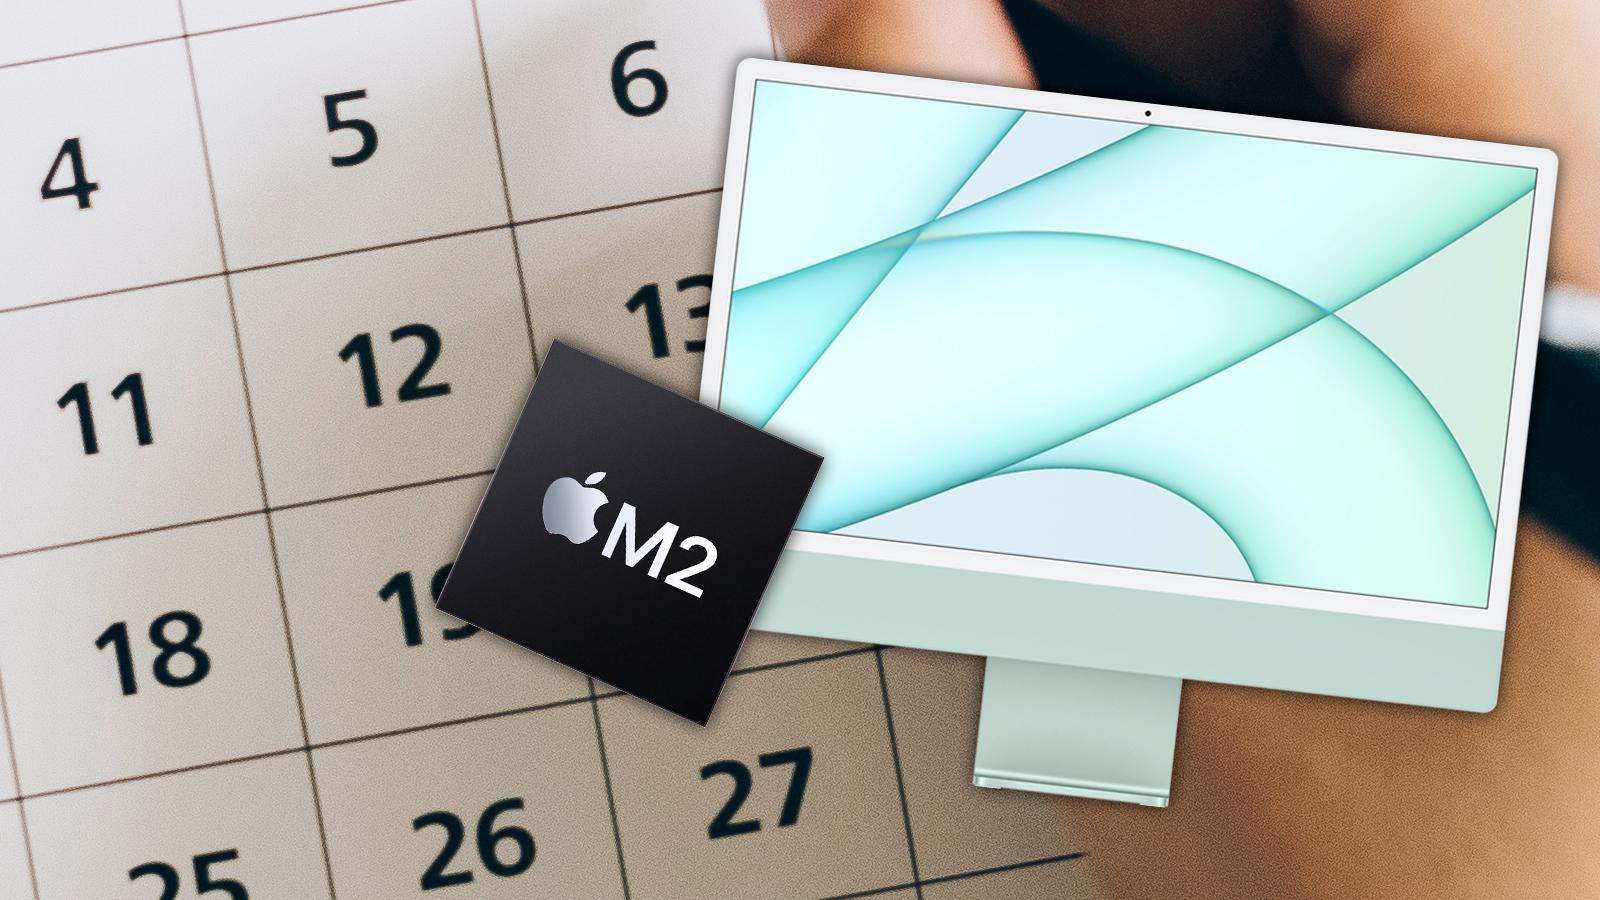 apple imac with m2 logo and calendar behind